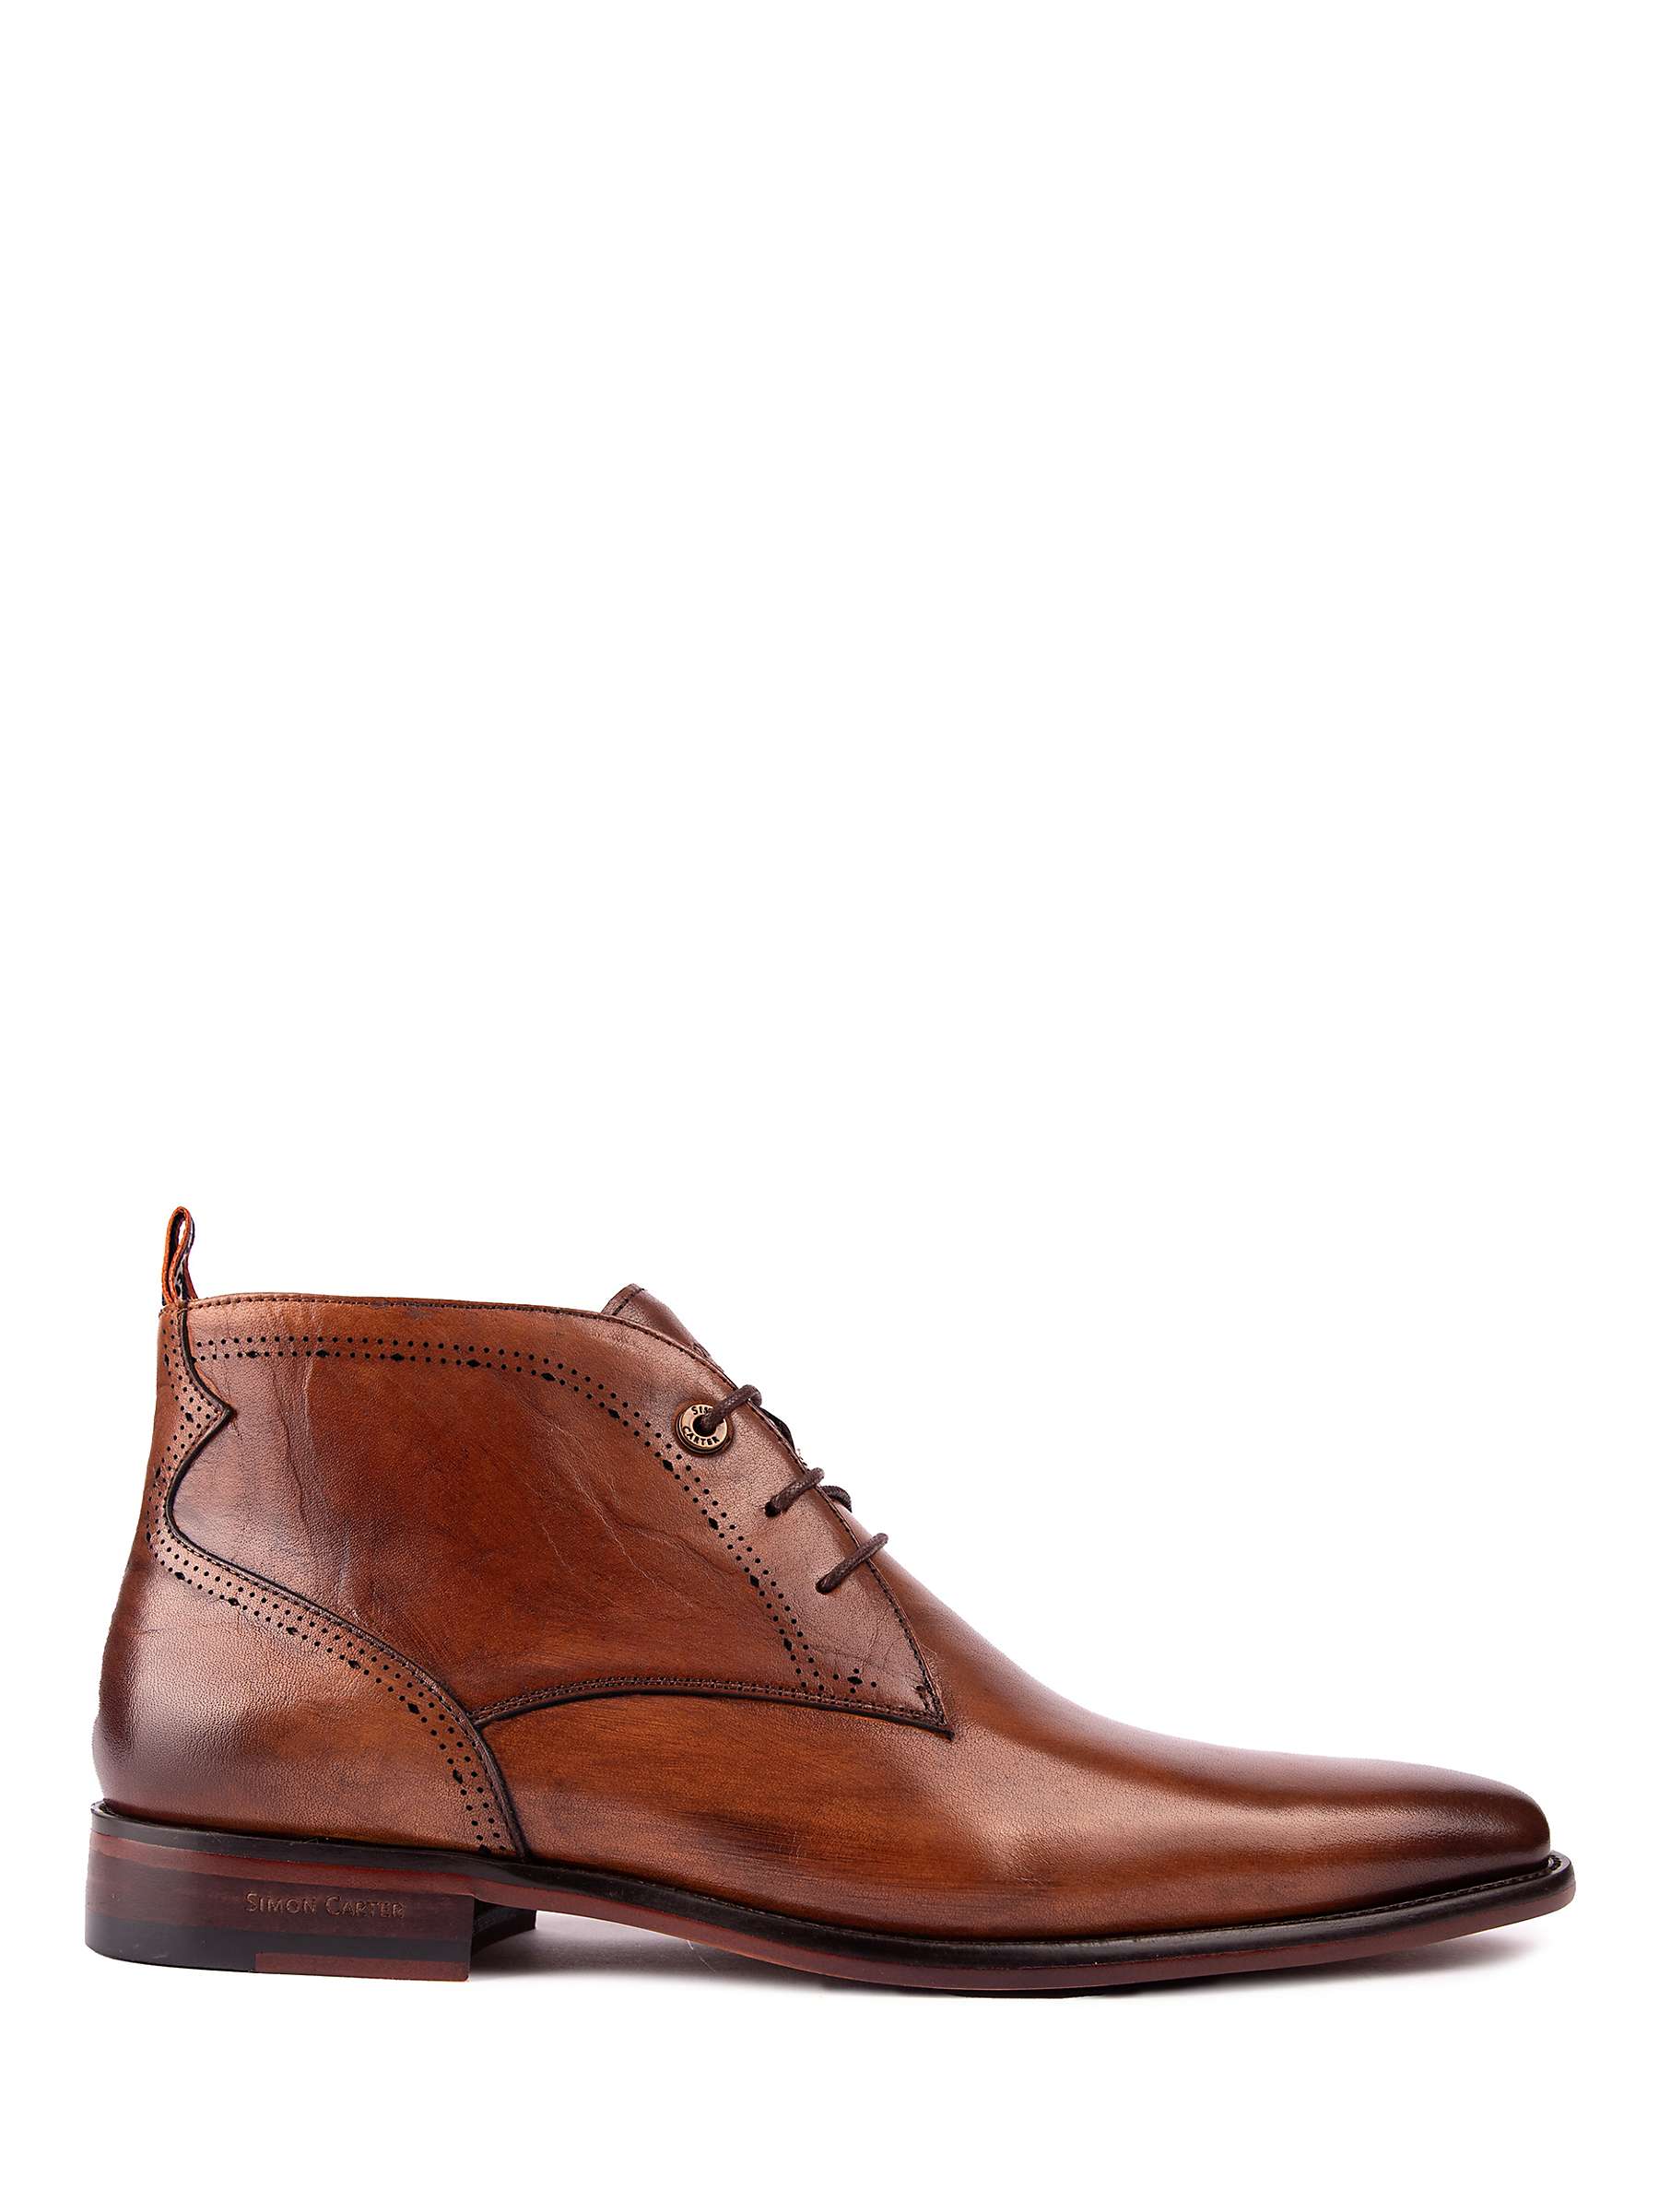 Buy Simon Carter Hop Leather Chukka Boots Online at johnlewis.com